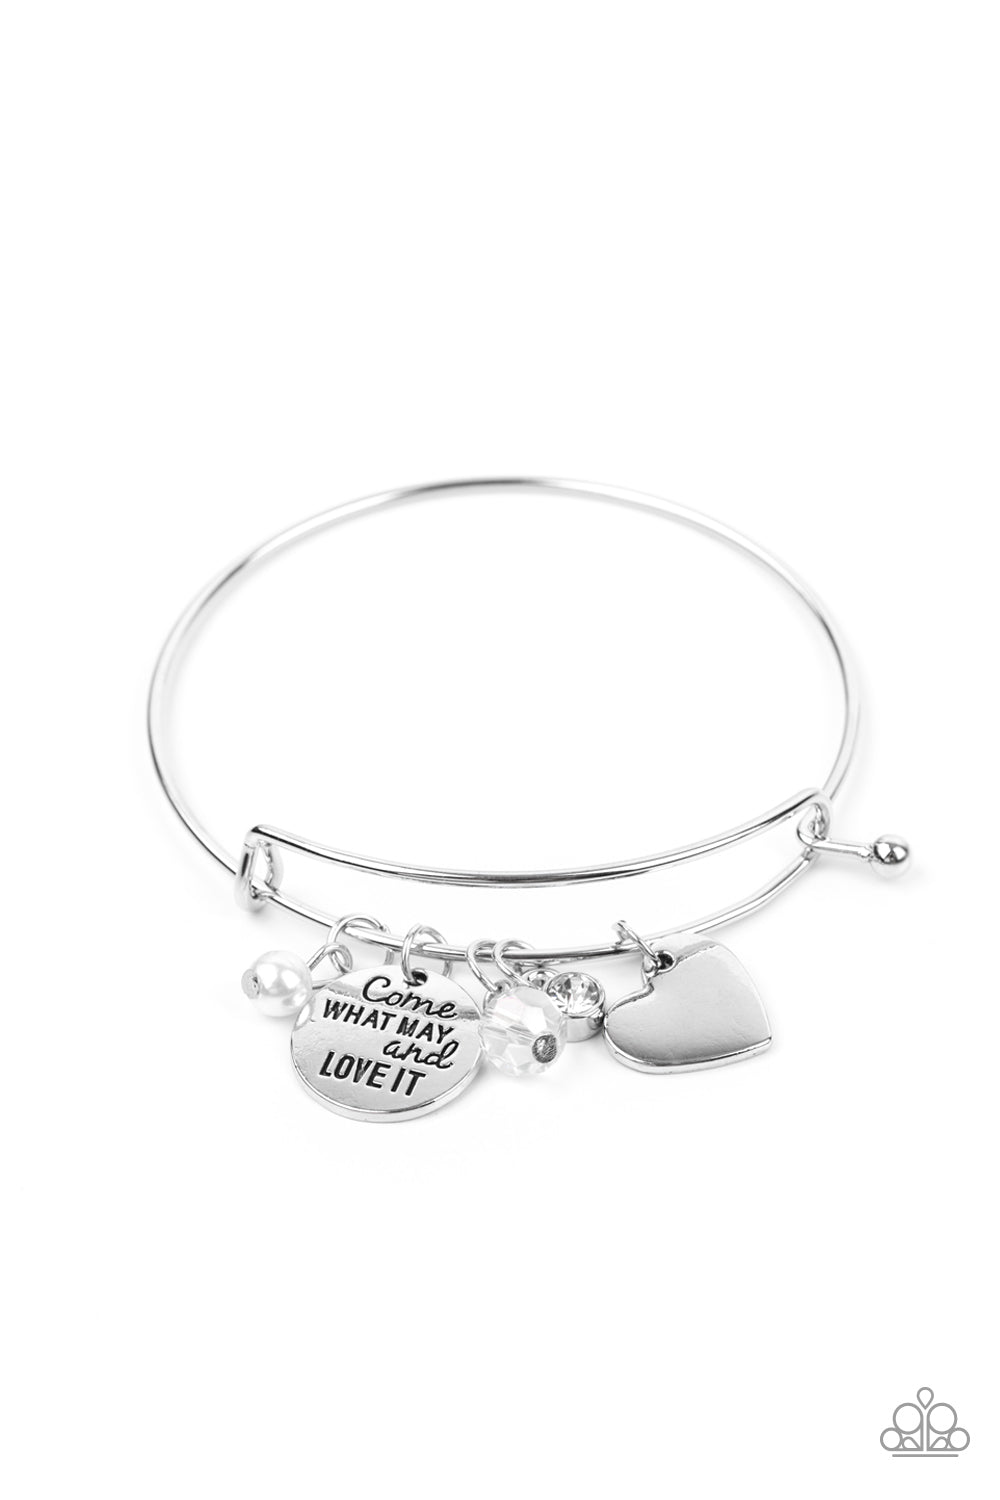 Come What May and Love It - white - Paparazzi bracelet